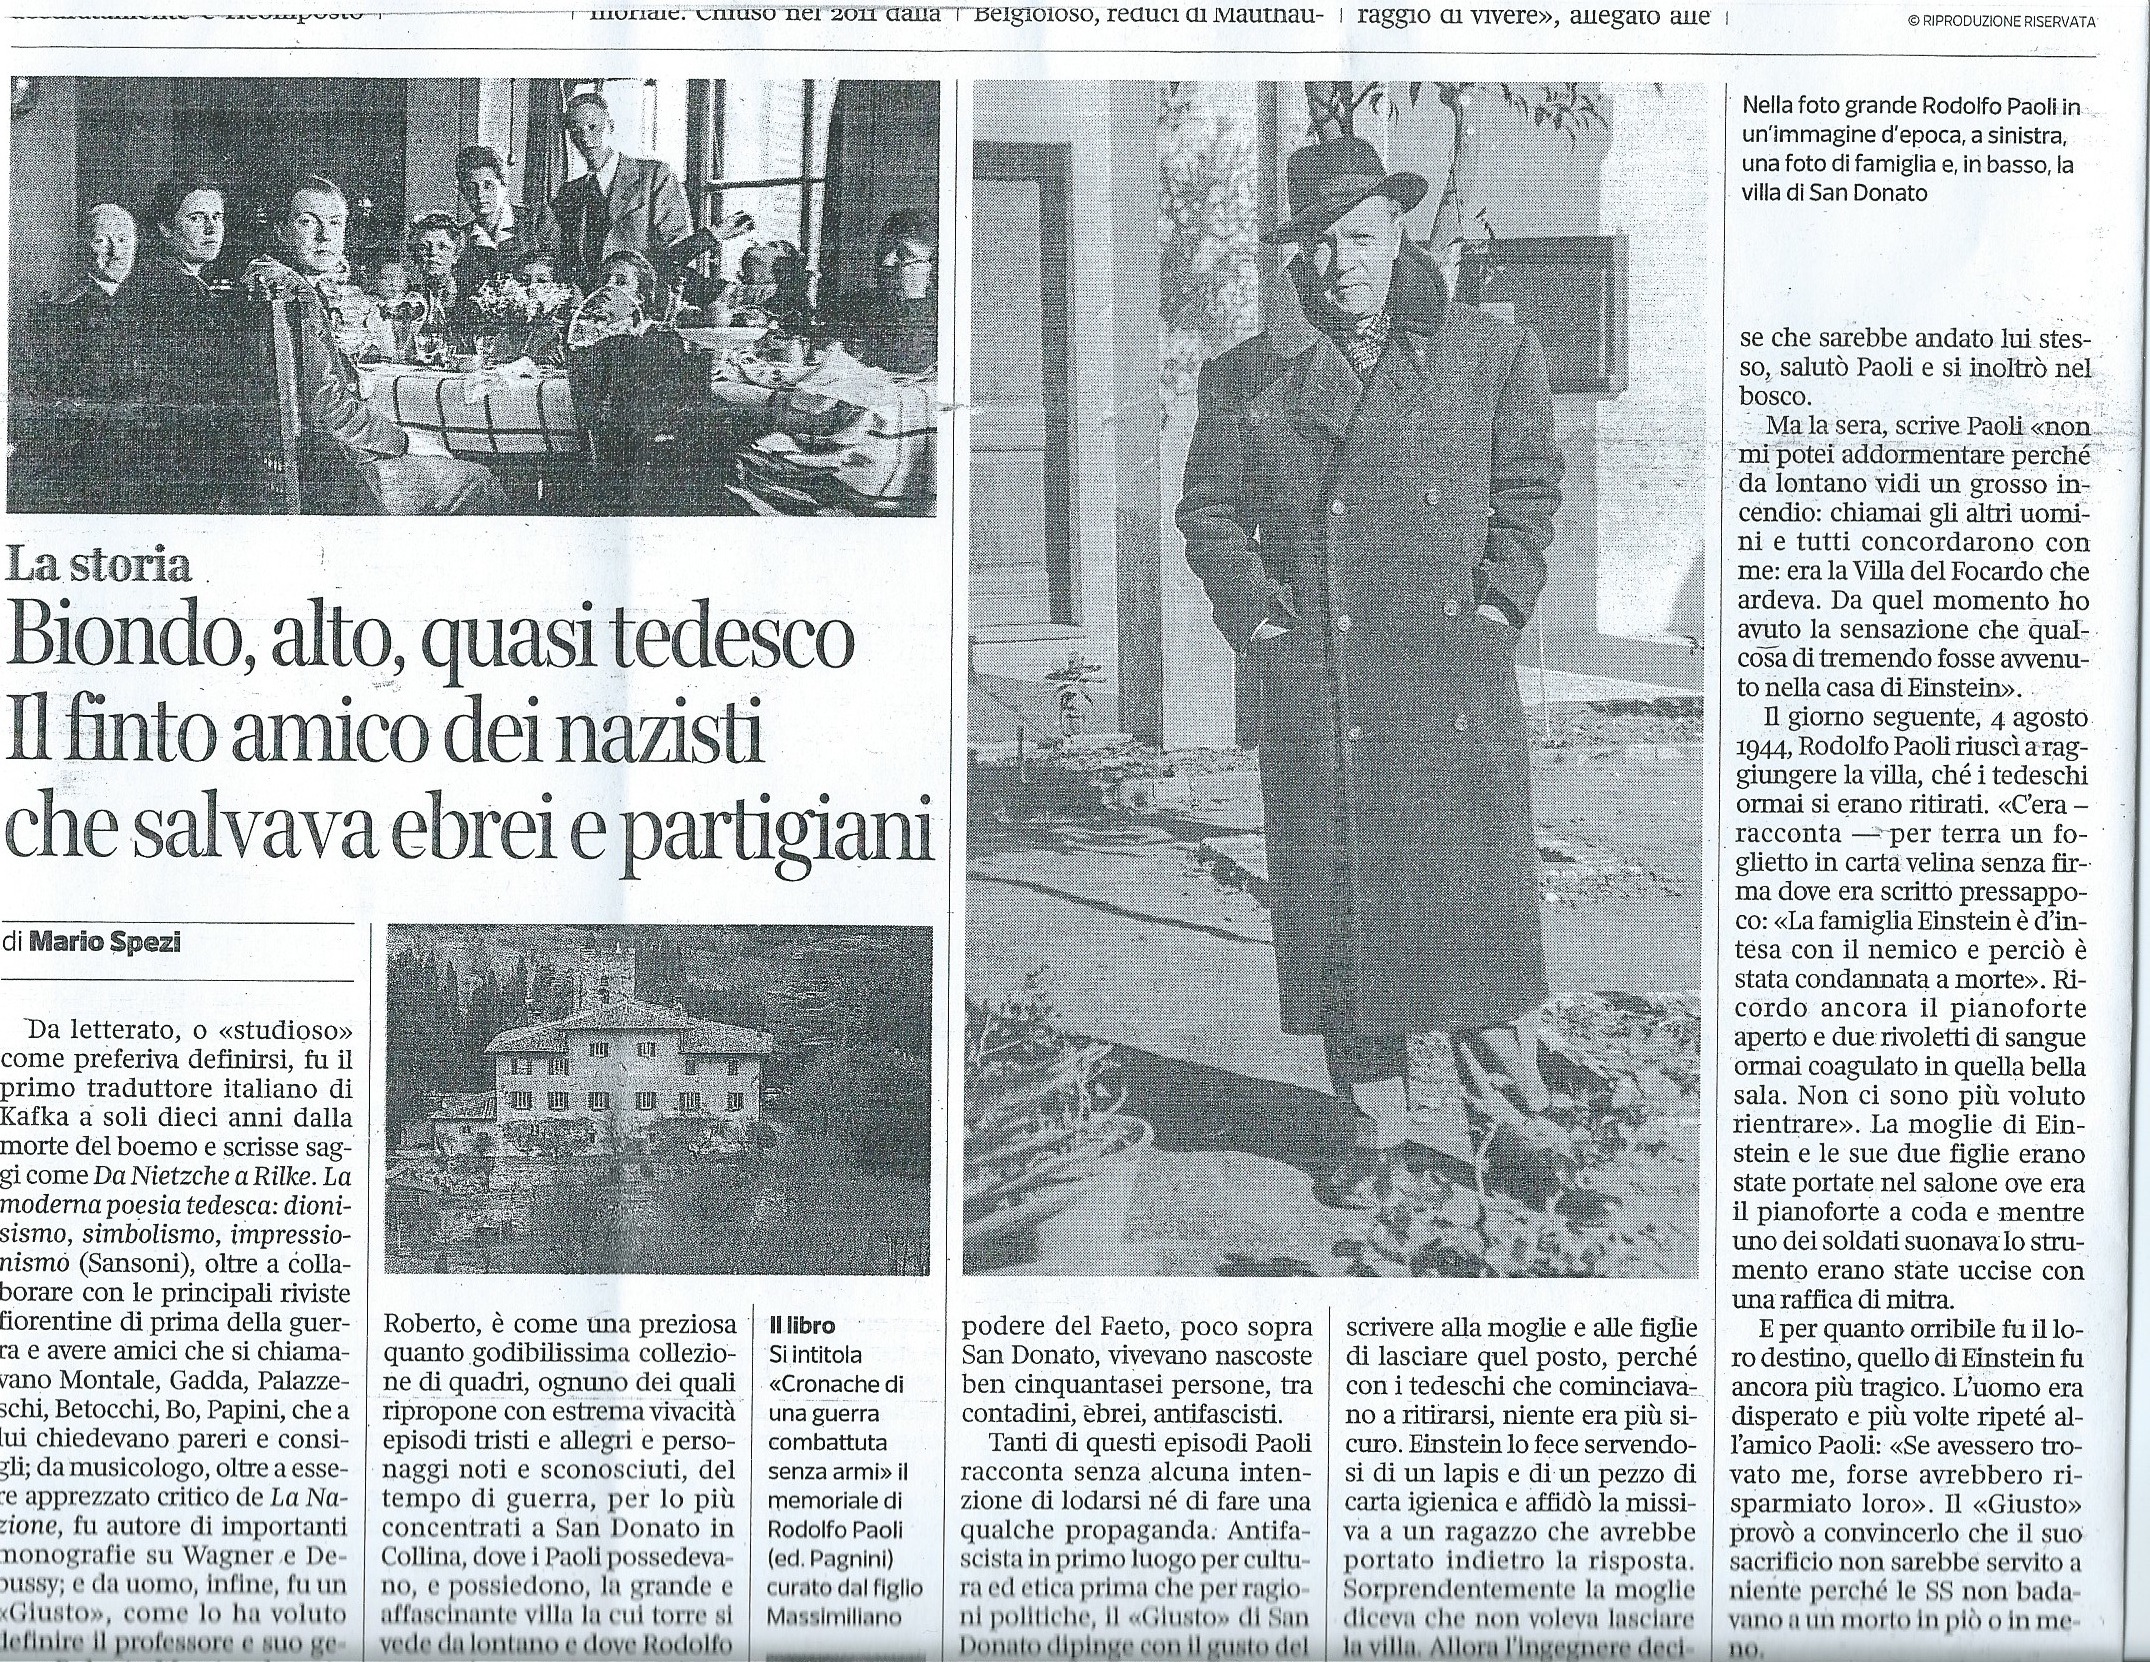 NEWSPAPER ARTICLE ABOUT RODOLFO